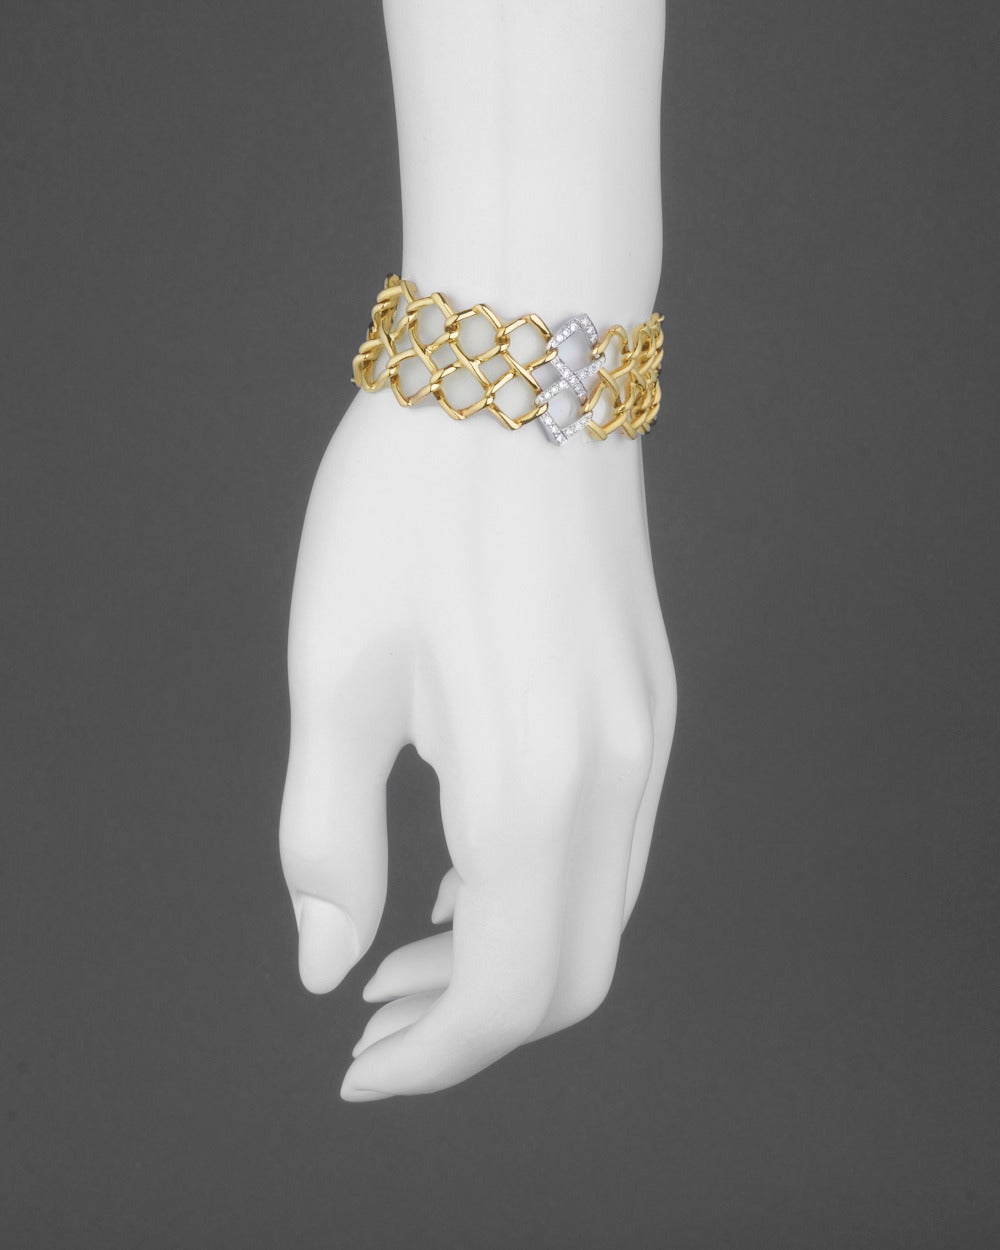 Two row yellow gold lattice bracelet, centering on a diamond-set figure-8 style link in white gold, mounted in 18k gold, circa 1982, signed Paloma Picasso/Tiffany & Co. 6.75